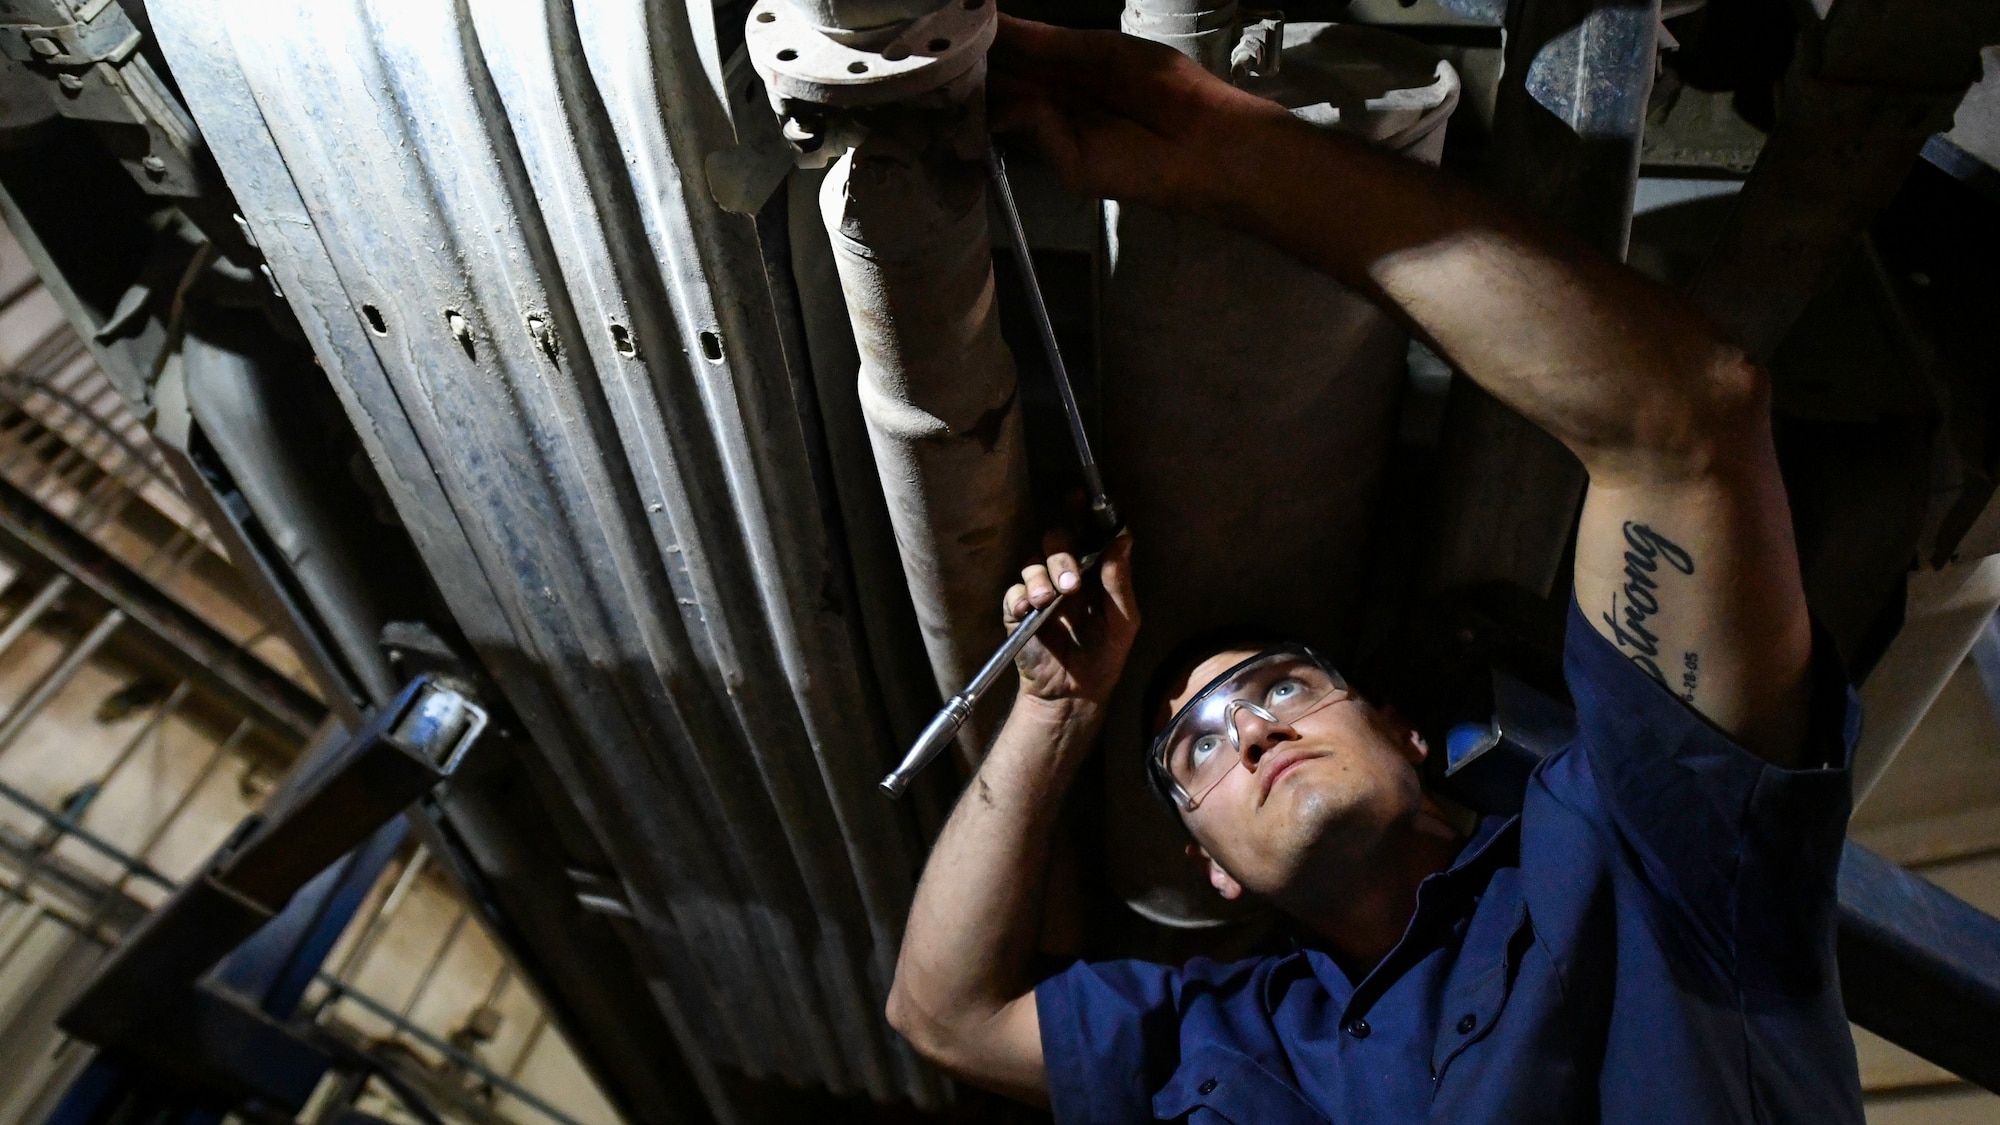 U.S. Air Force Senior Airman Darian O’Banion, 386th Expeditionary Logistics Readiness Squadron vehicle and equipment maintenance journeyman, secures a driveshaft to a vehicle at Ali Al Salem Air Base, Kuwait, July 29, 2019. Airmen assigned to the vehicle and equipment maintenance shop work on an average of 10 different automobiles a week. (U.S. Air Force photo by Staff Sgt. Mozer O. Da Cunha)